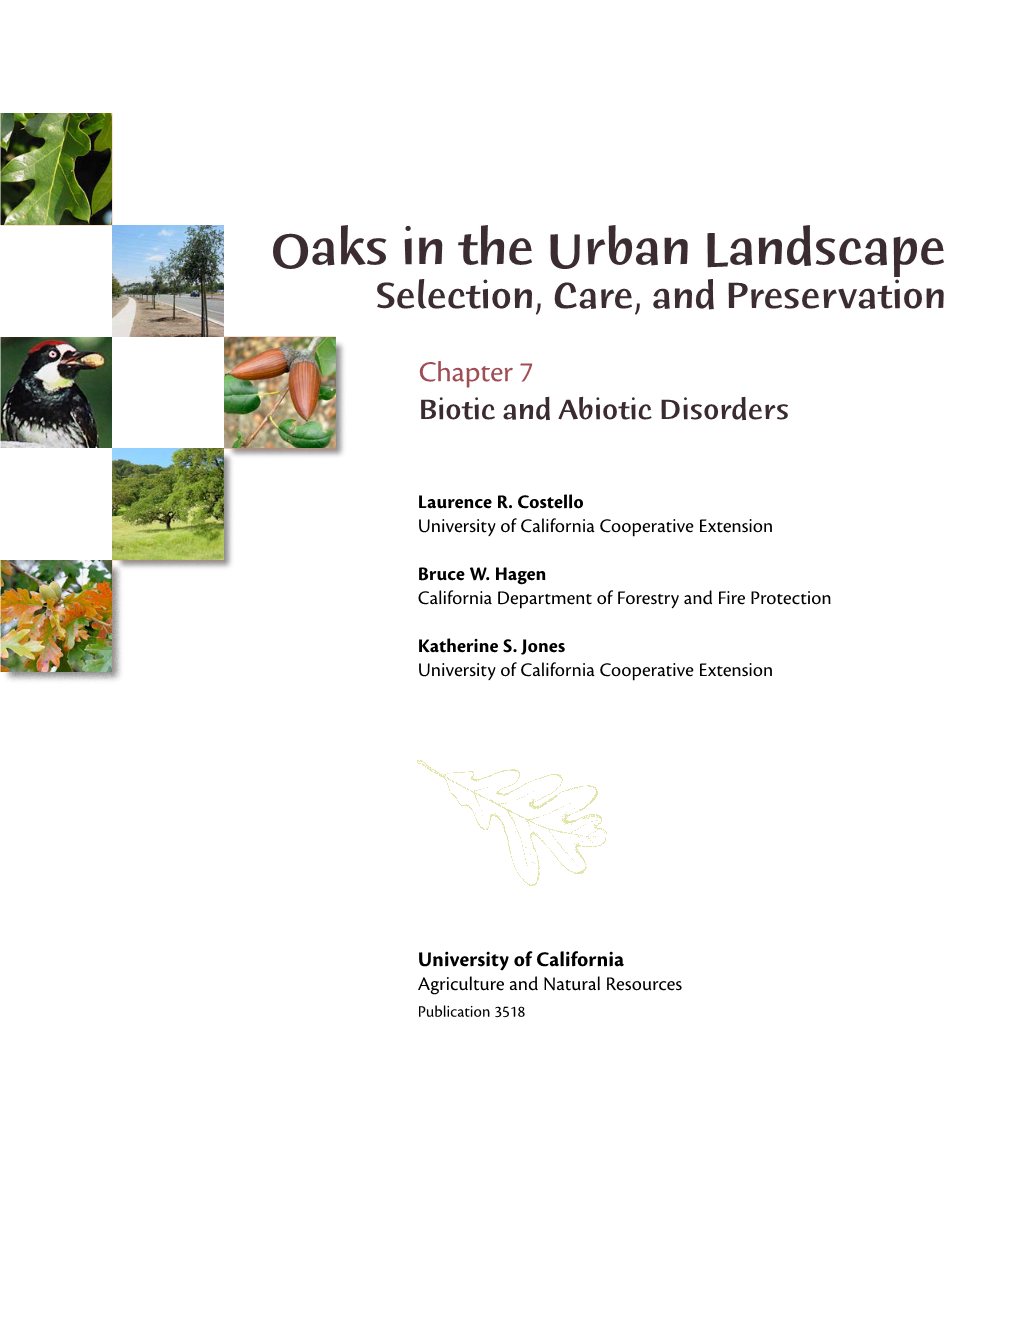 Oaks in the Urban Landscape Selection, Care, and Preservation